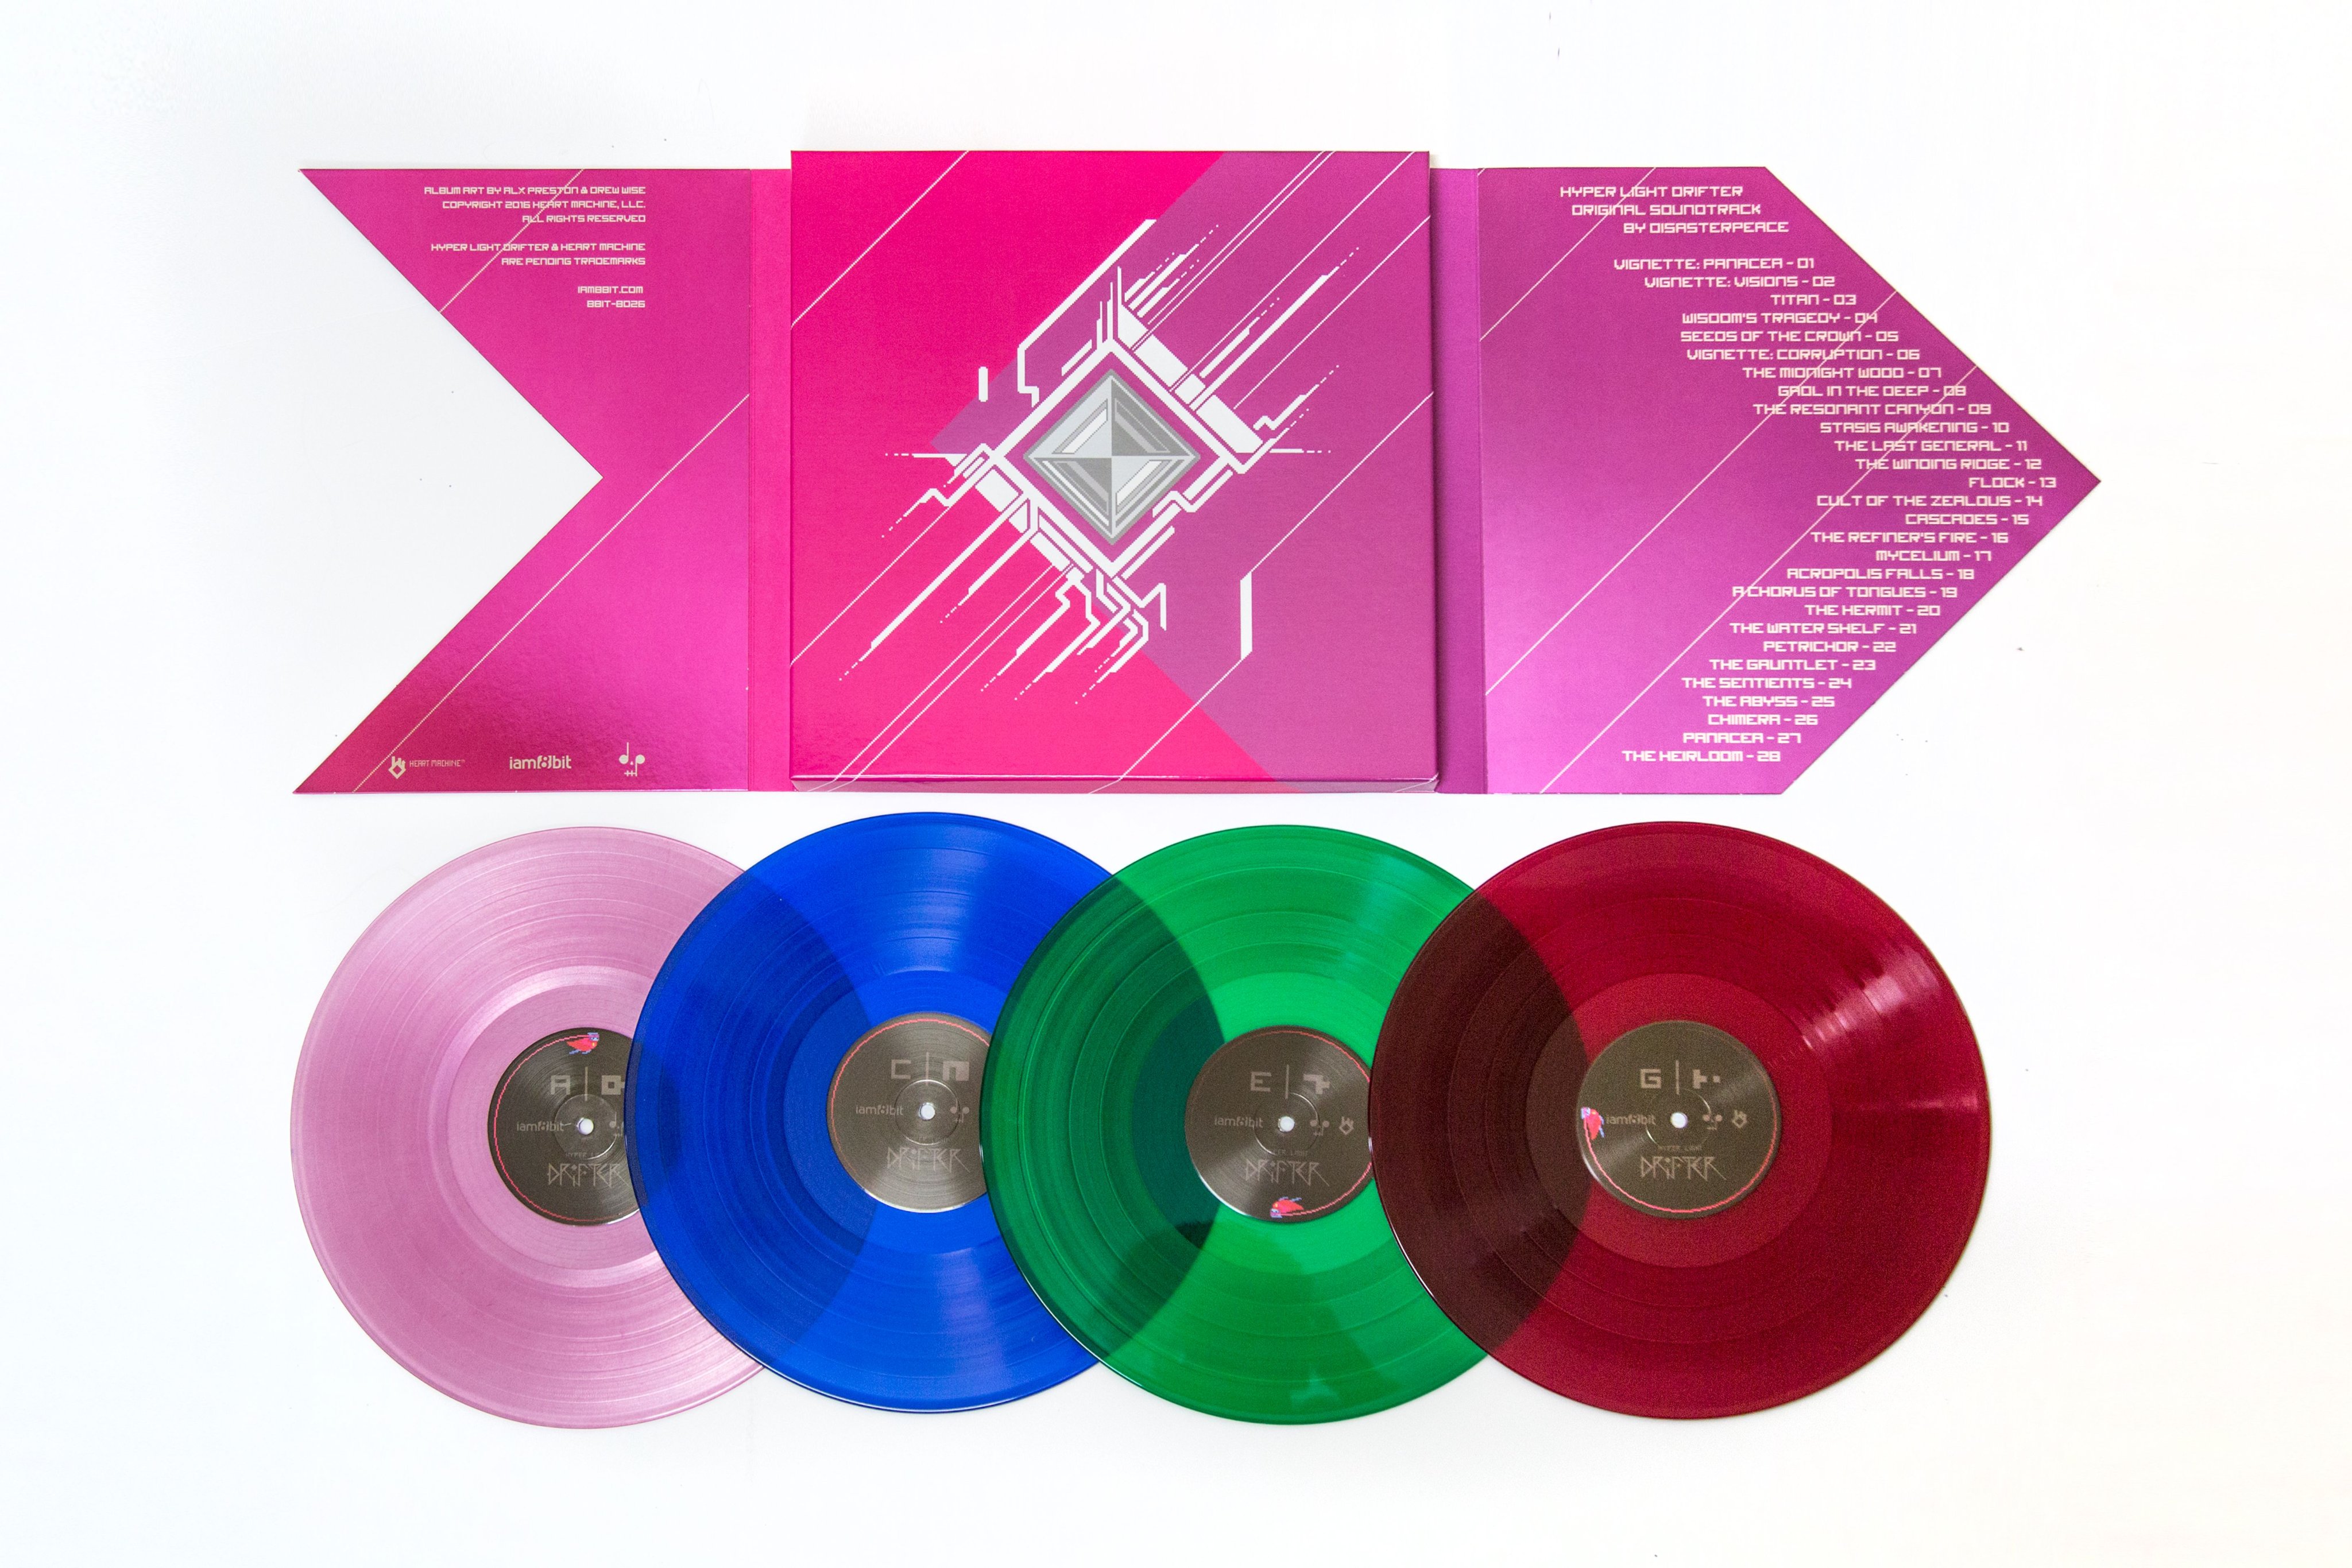 Overlegenhed låne Vejhus iam8bit on Twitter: "🎂❤️Happy 5th Birthday Hyper Light Drifter!💜🎂 In  celebration, we've opened up our archival collection to give away ONE copy  of this legendary vinyl soundtrack. RT and follow for a